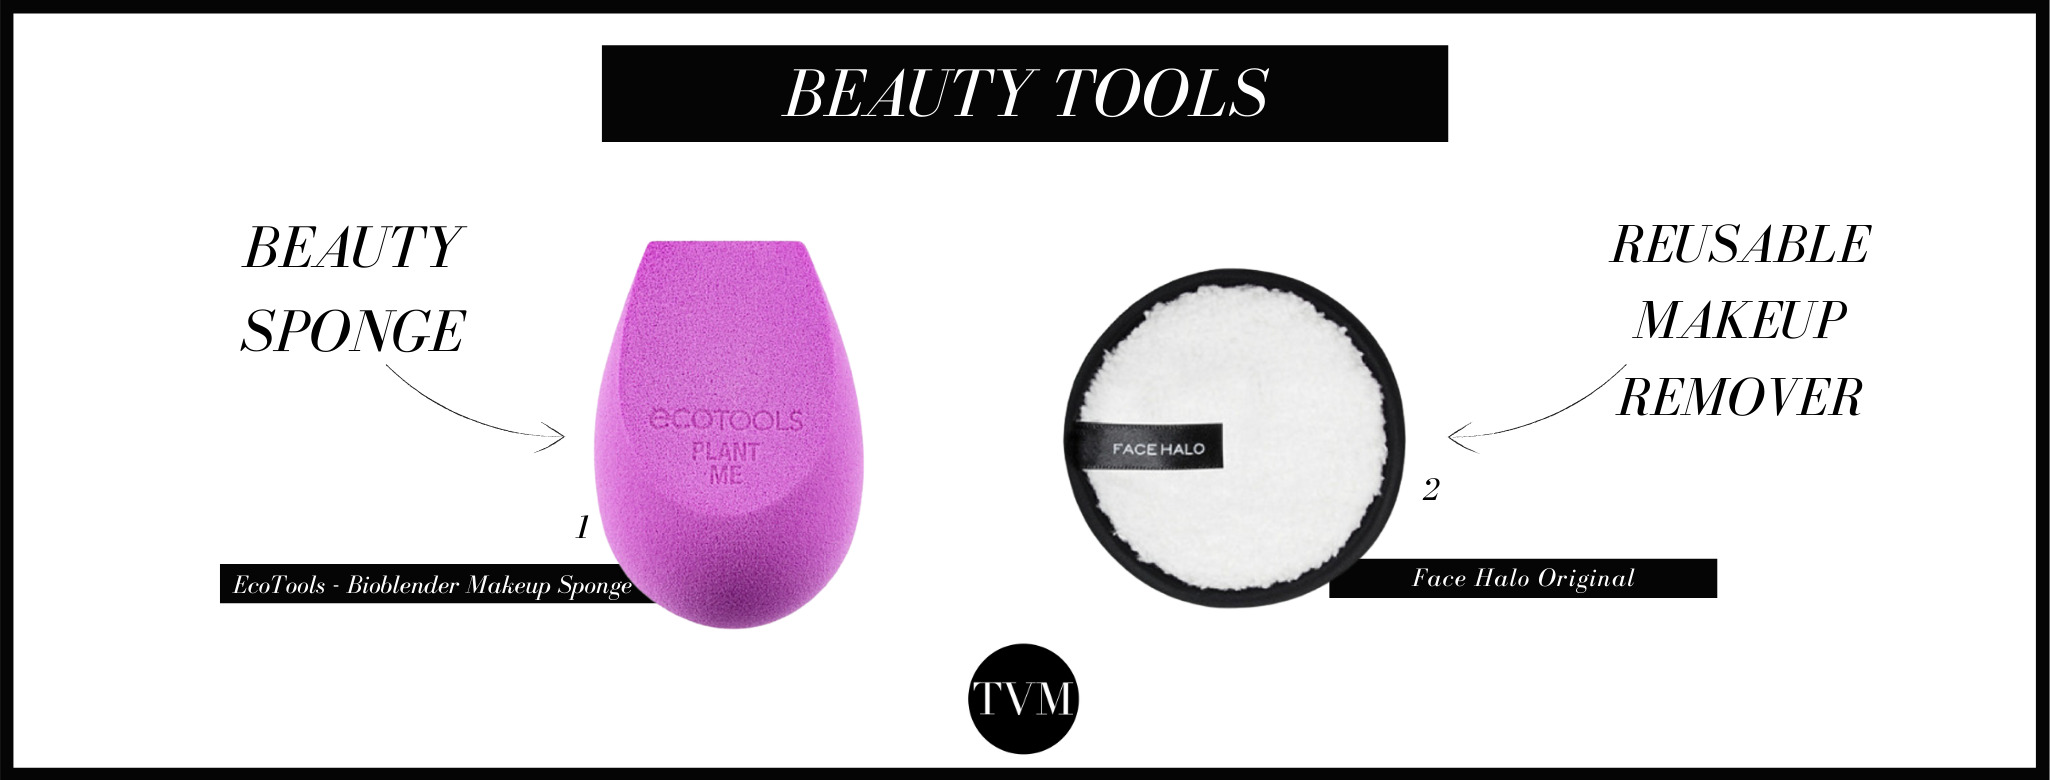 Beauty tools are very important to guarantee a better application and results on your makeup and skincare routine. The major cons associated with beauty tools, mainly when it comes to makeup removers, is the fact that they are very disposable, making a huge impact on the environment.